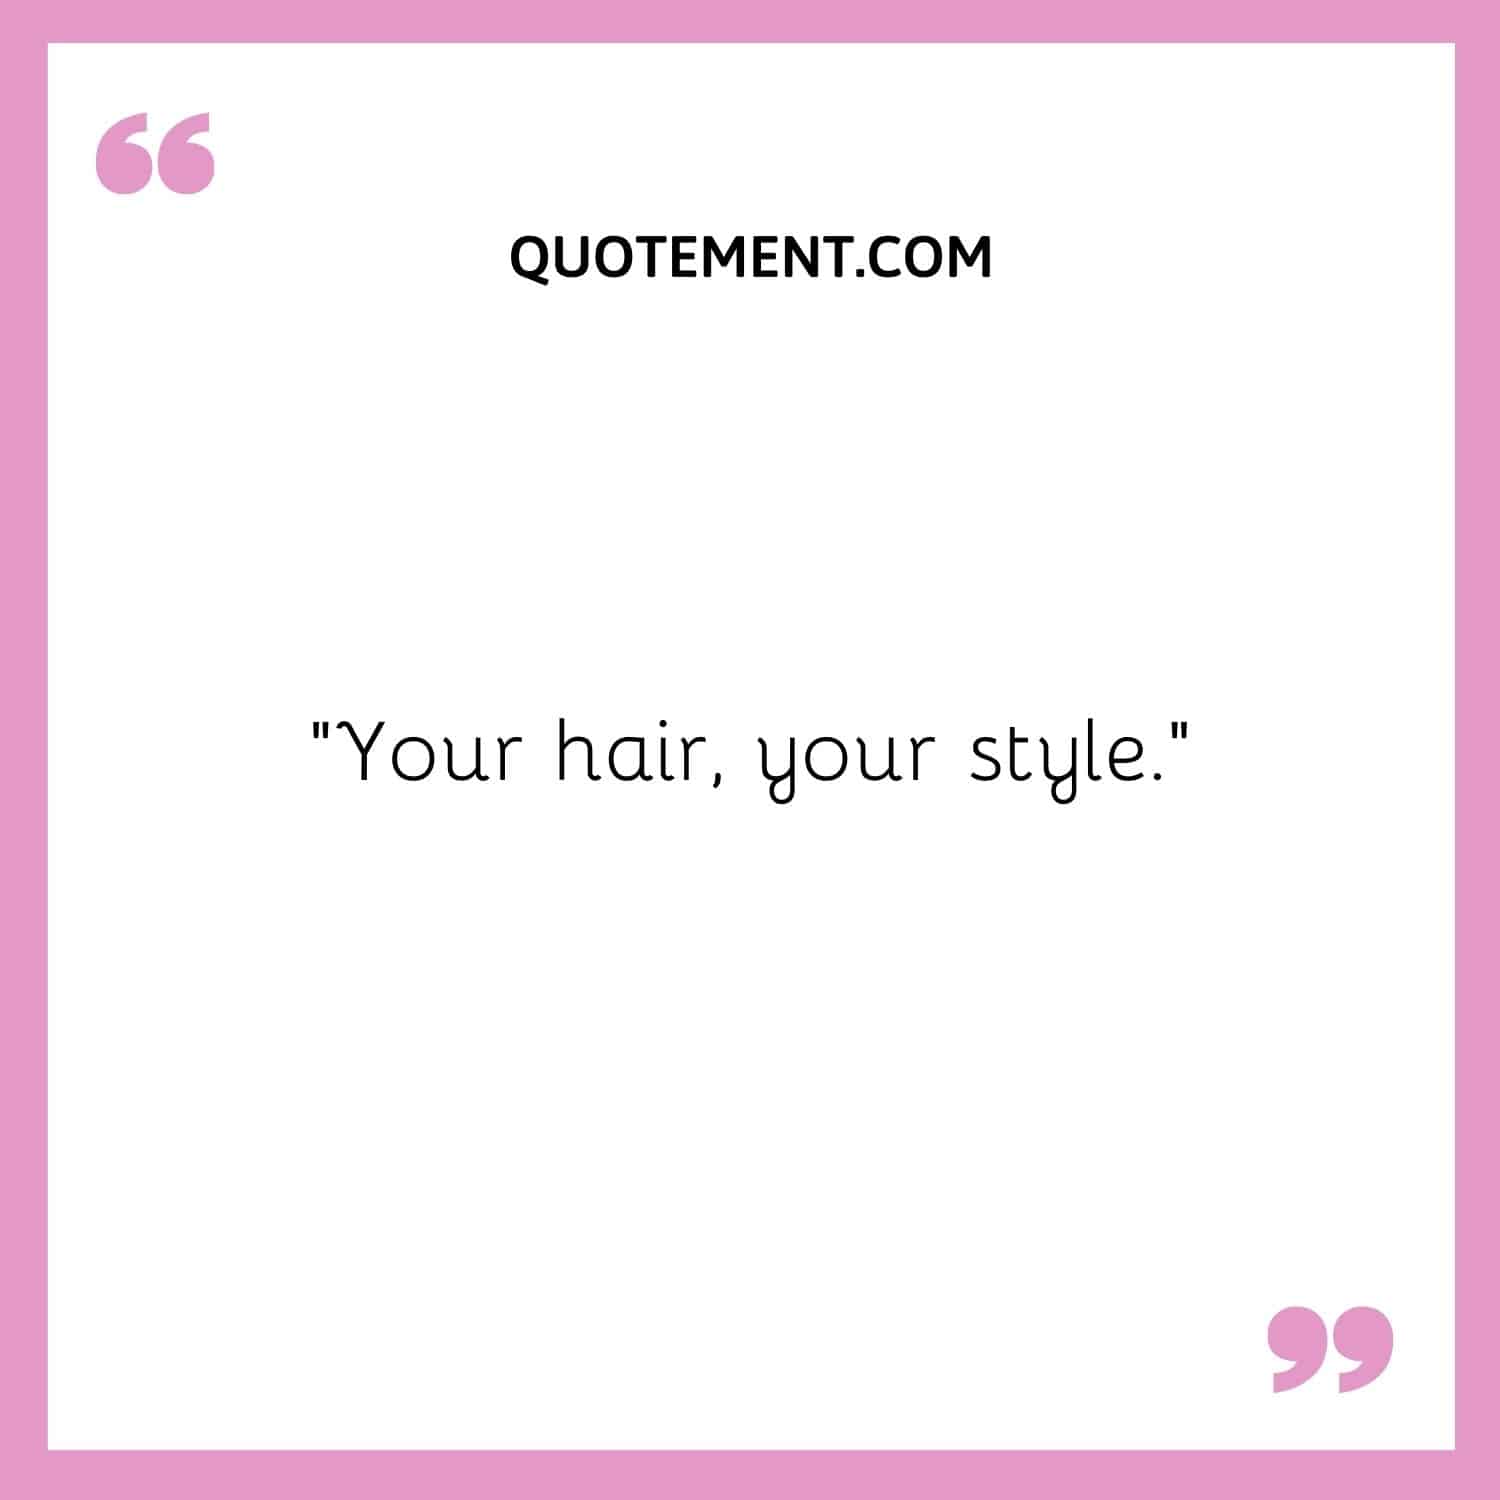 Your hair, your style.